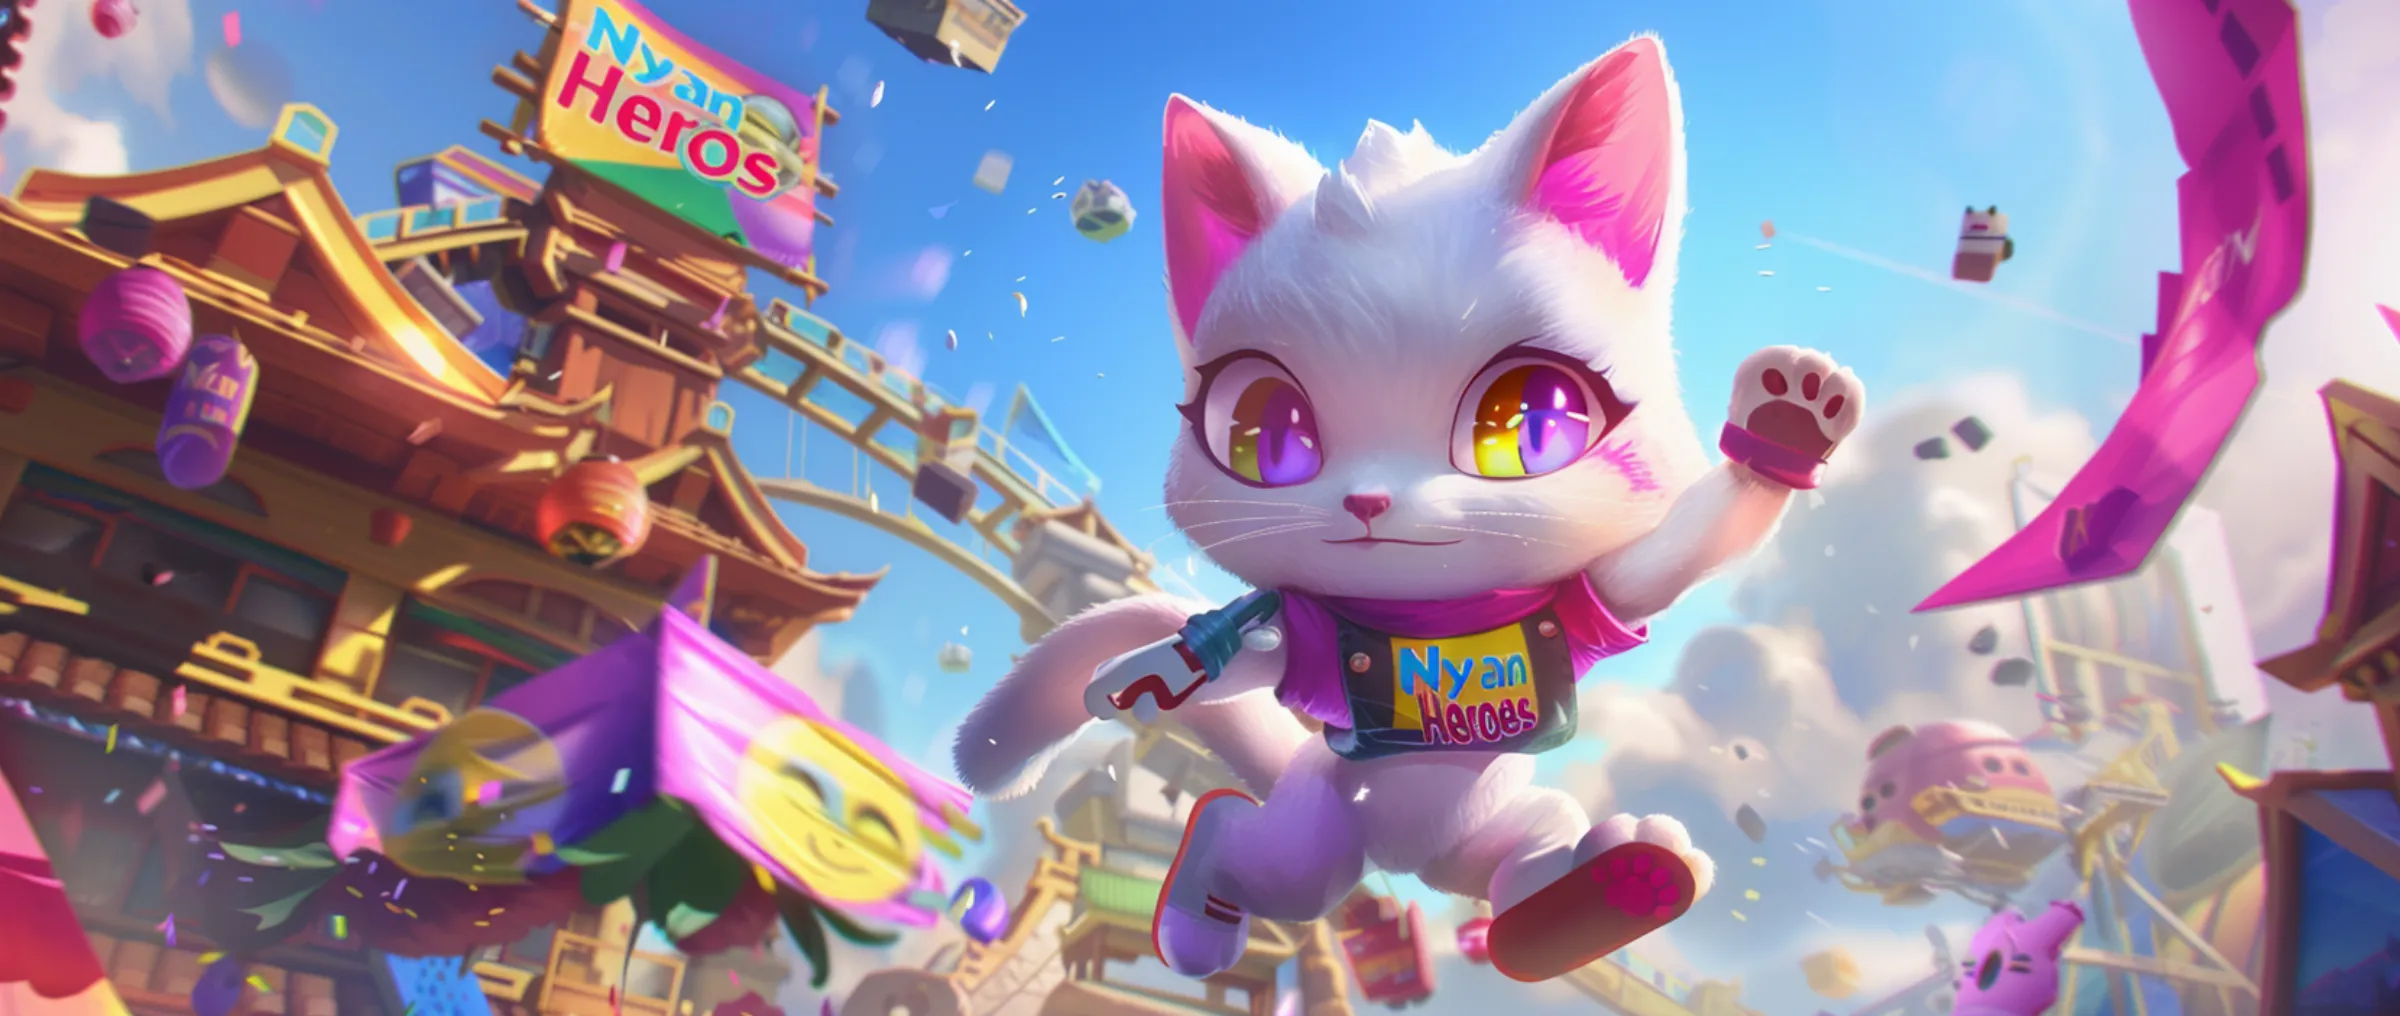 The demo of Nyan Heroes is now available in the Epic Games Store